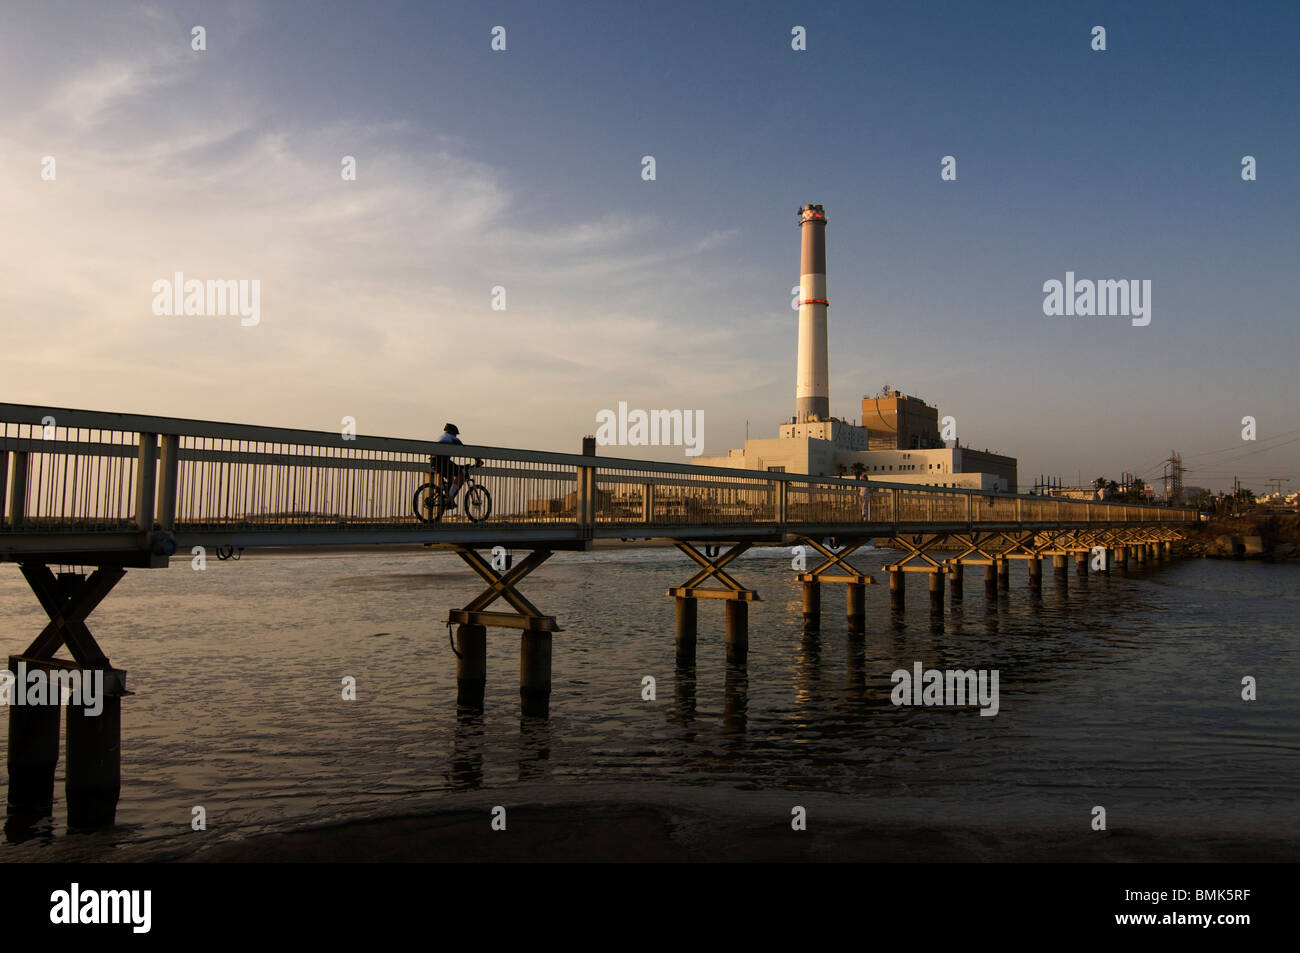 Bicycler crossing a bridge over the Yarkon or Yarqon river near Reading power station supplying electrical power to the Tel Aviv district in Israel Stock Photo